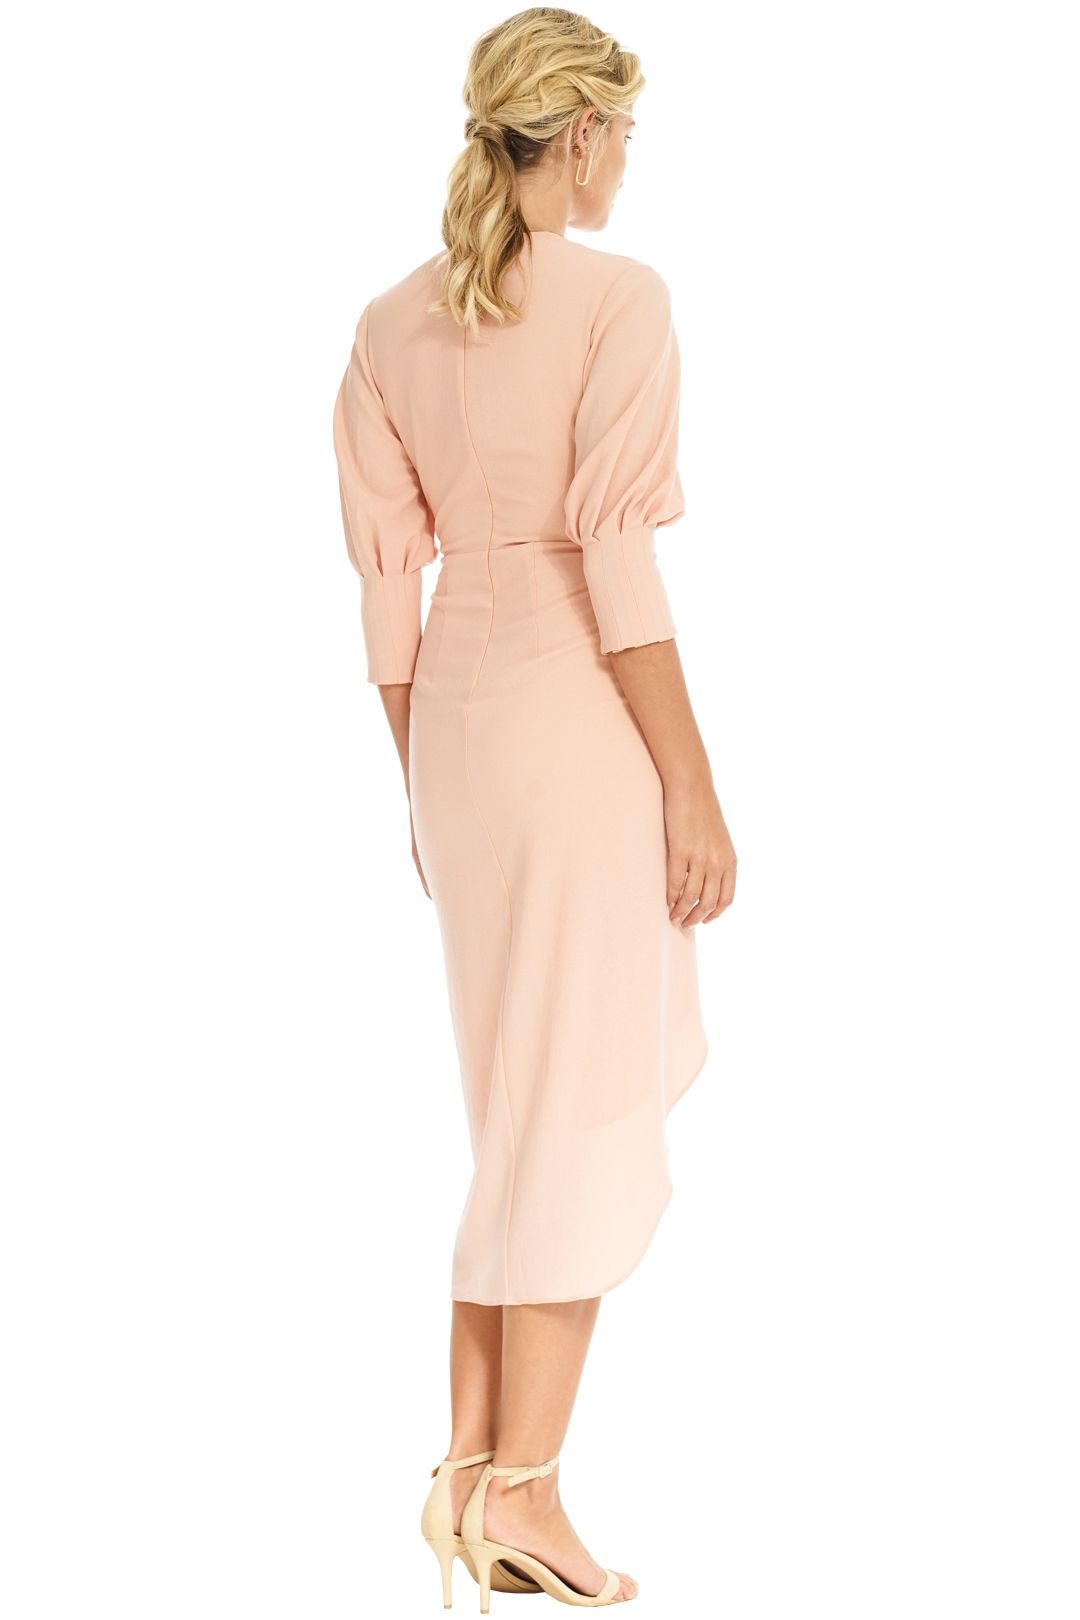 Manning Cartell - Free Fall Dress - Rosewater - Back